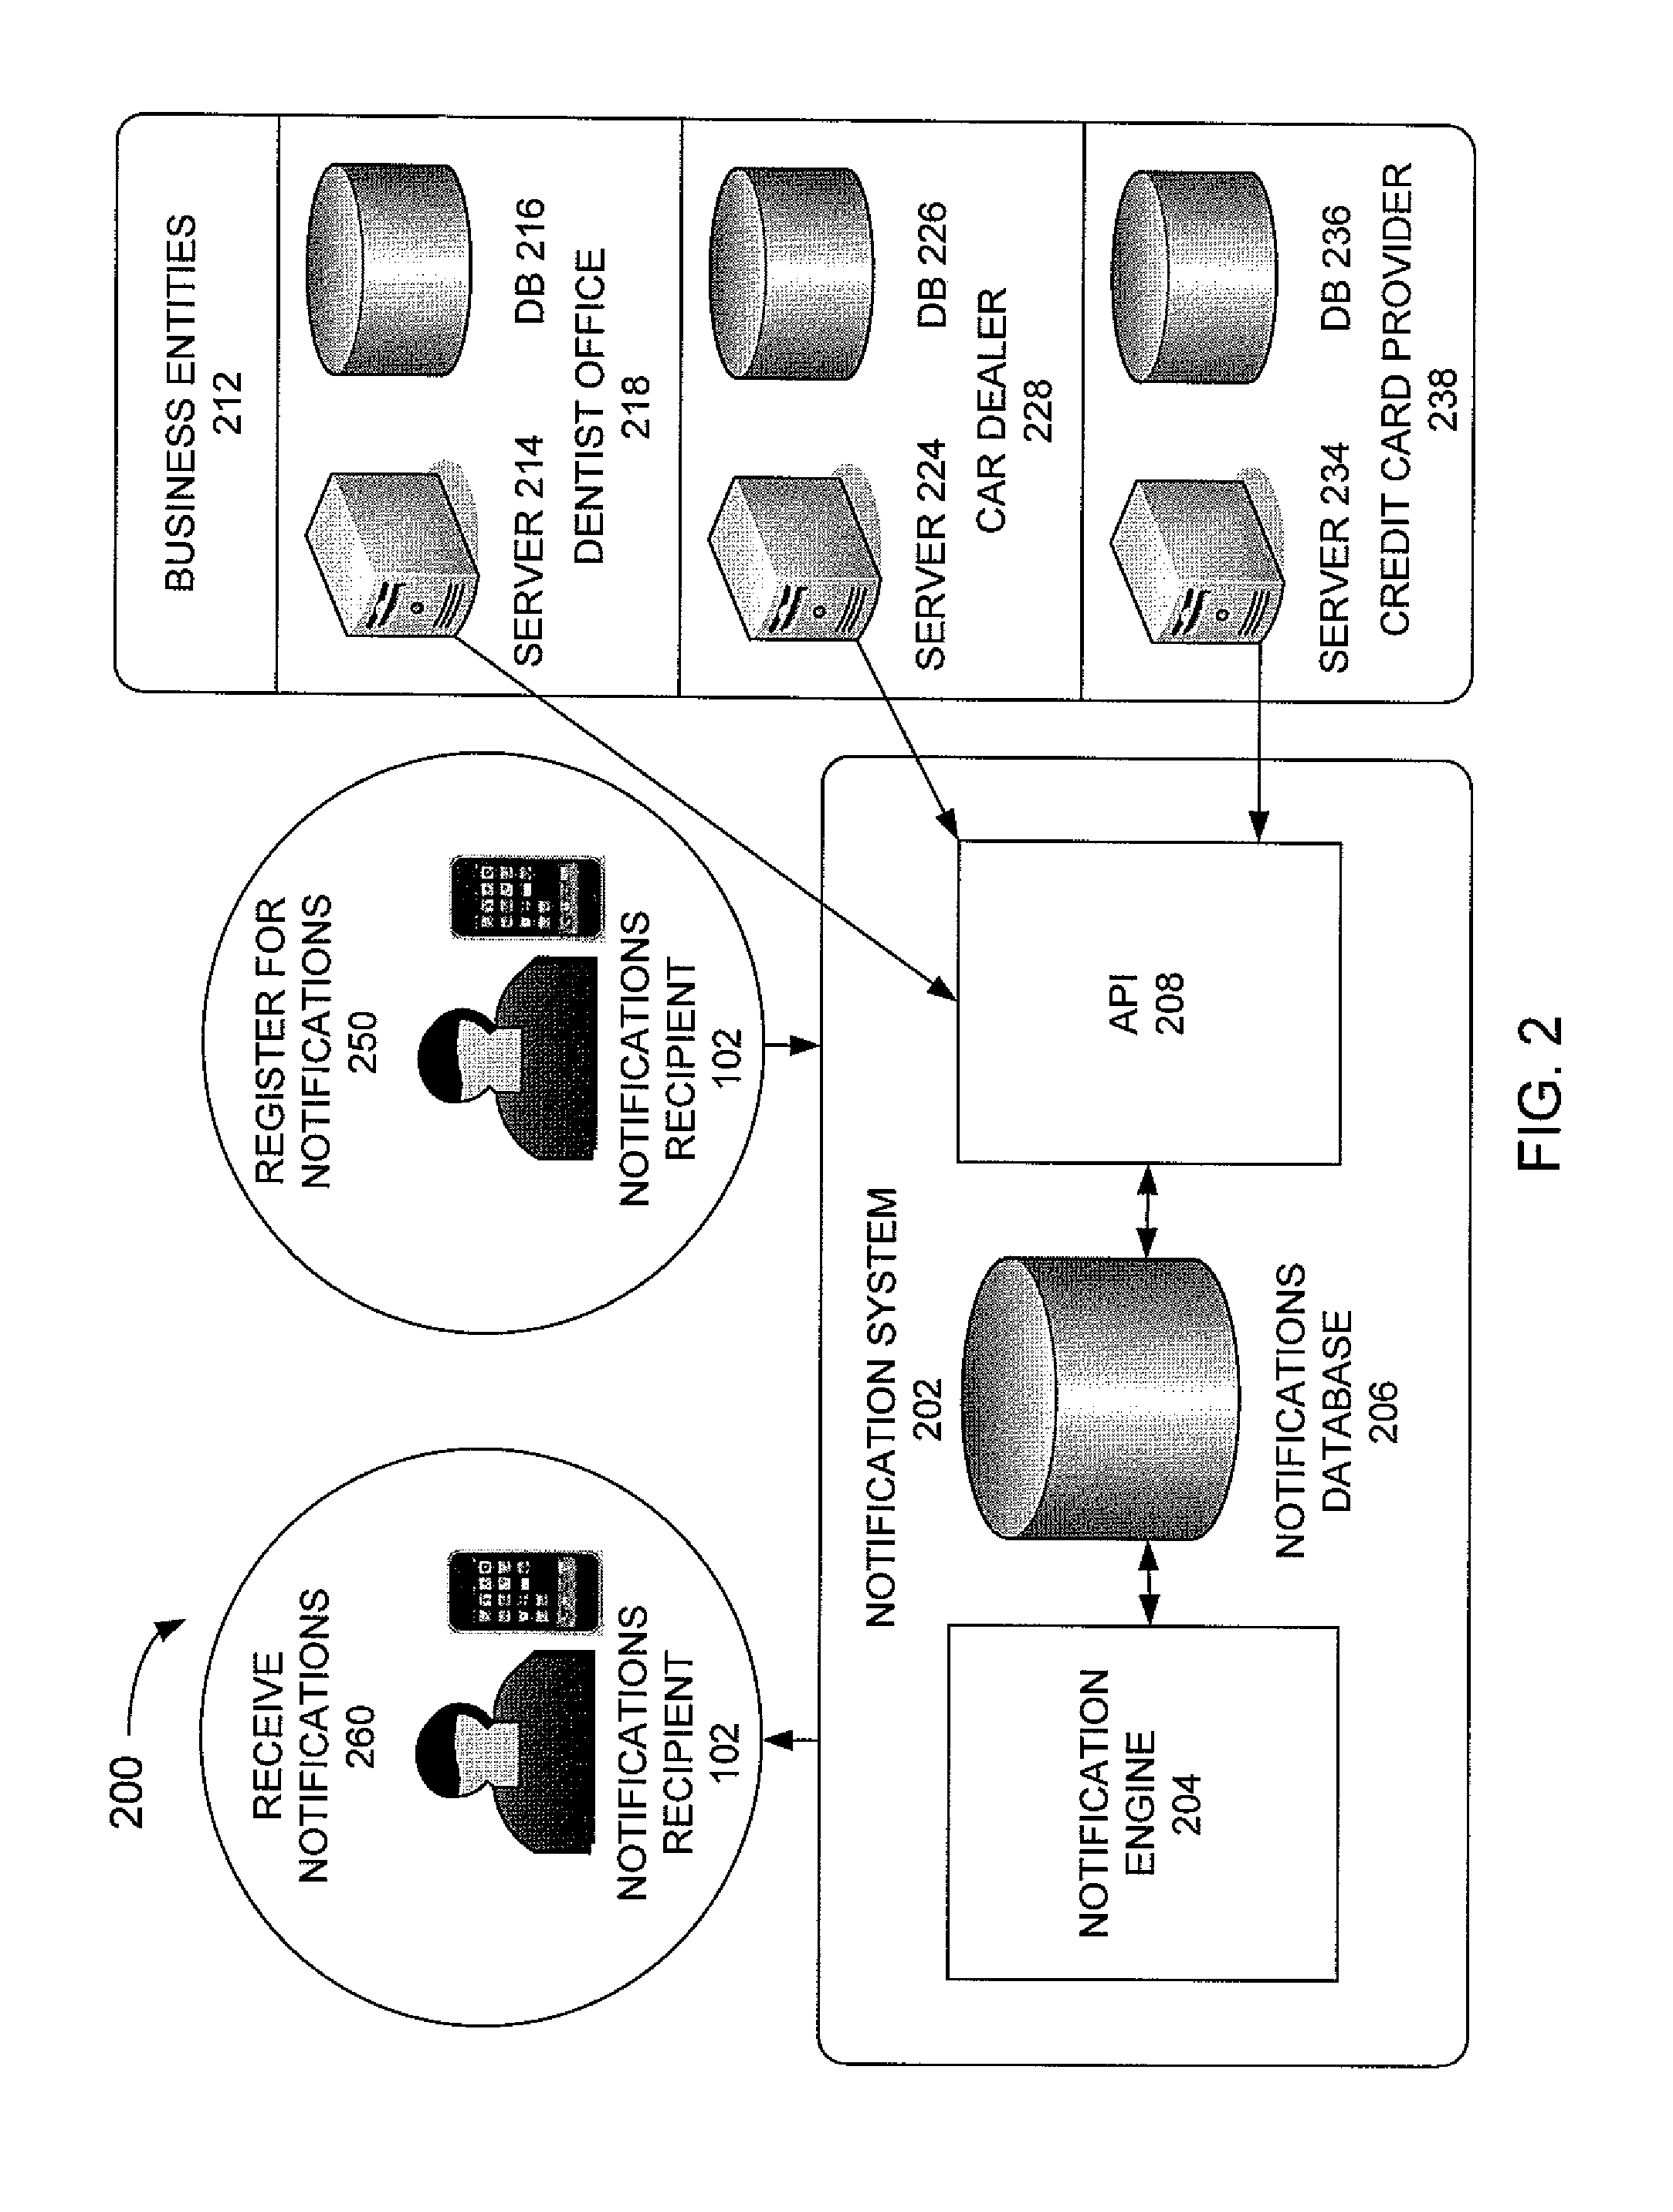 Method and apparatus of providing notification services to smartphone devices